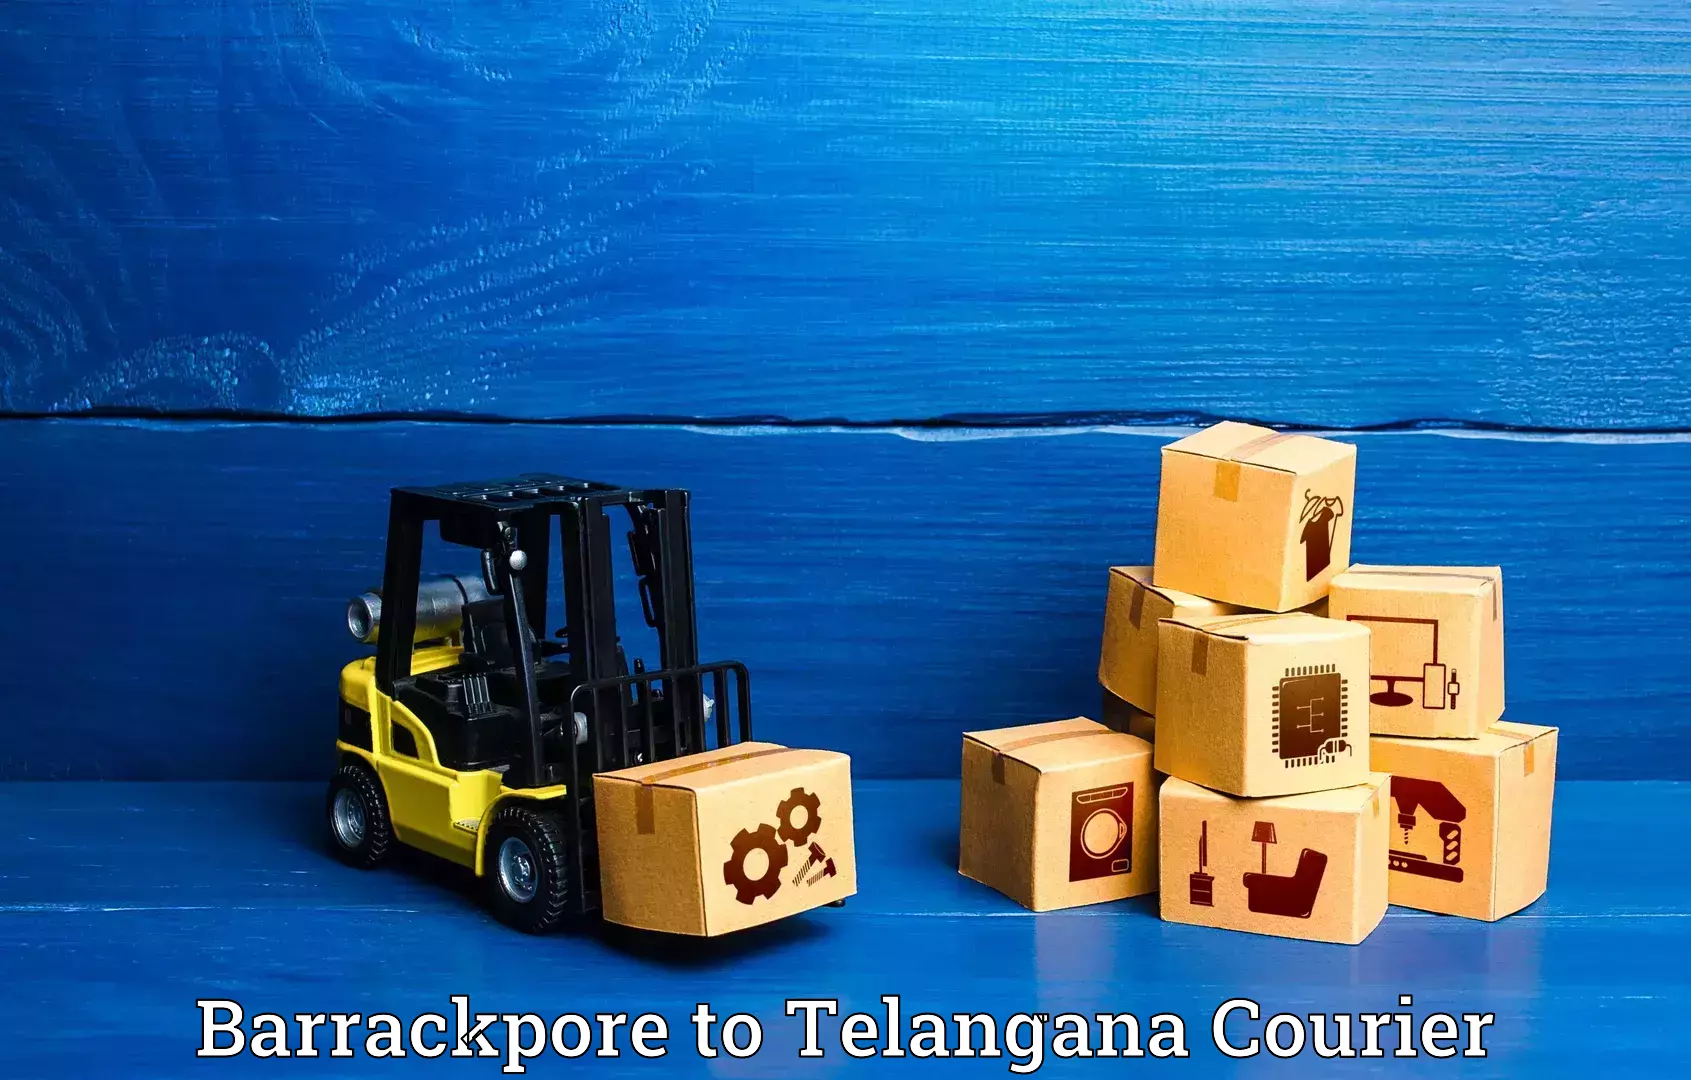 Luggage shipment tracking Barrackpore to Allapalli